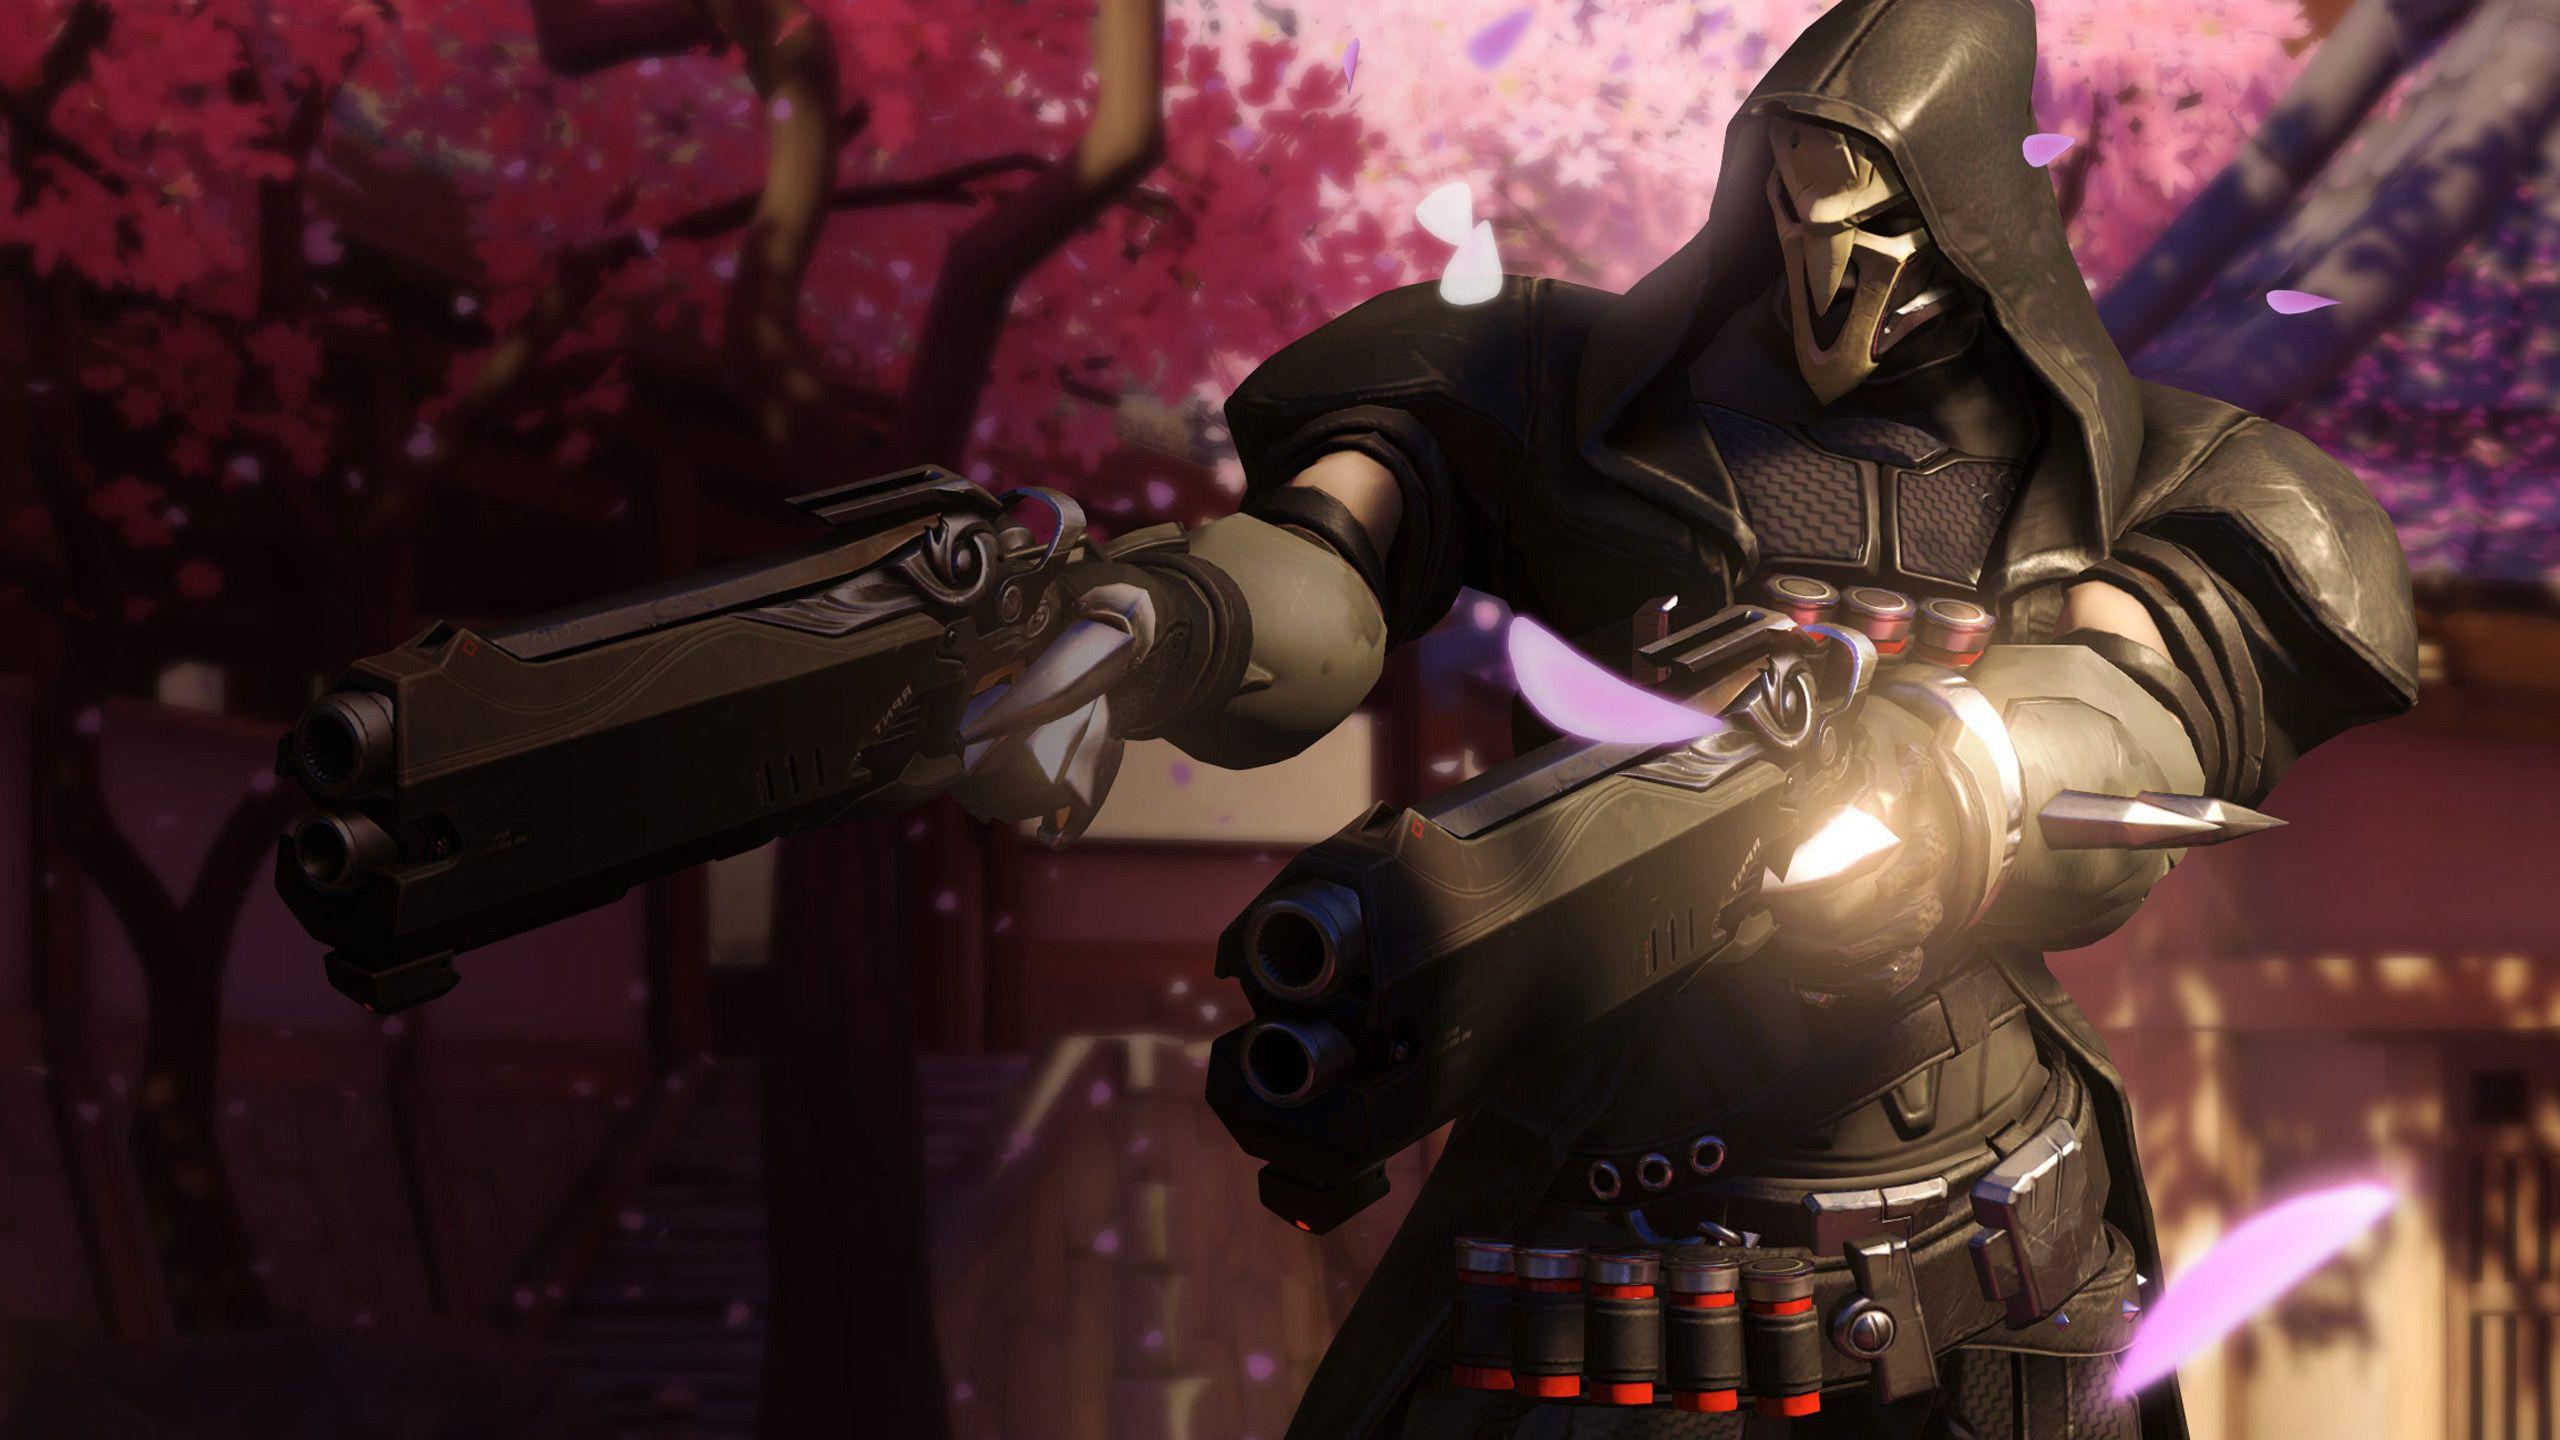 Overwatch Wallpaper Reaper. Ideas for the House